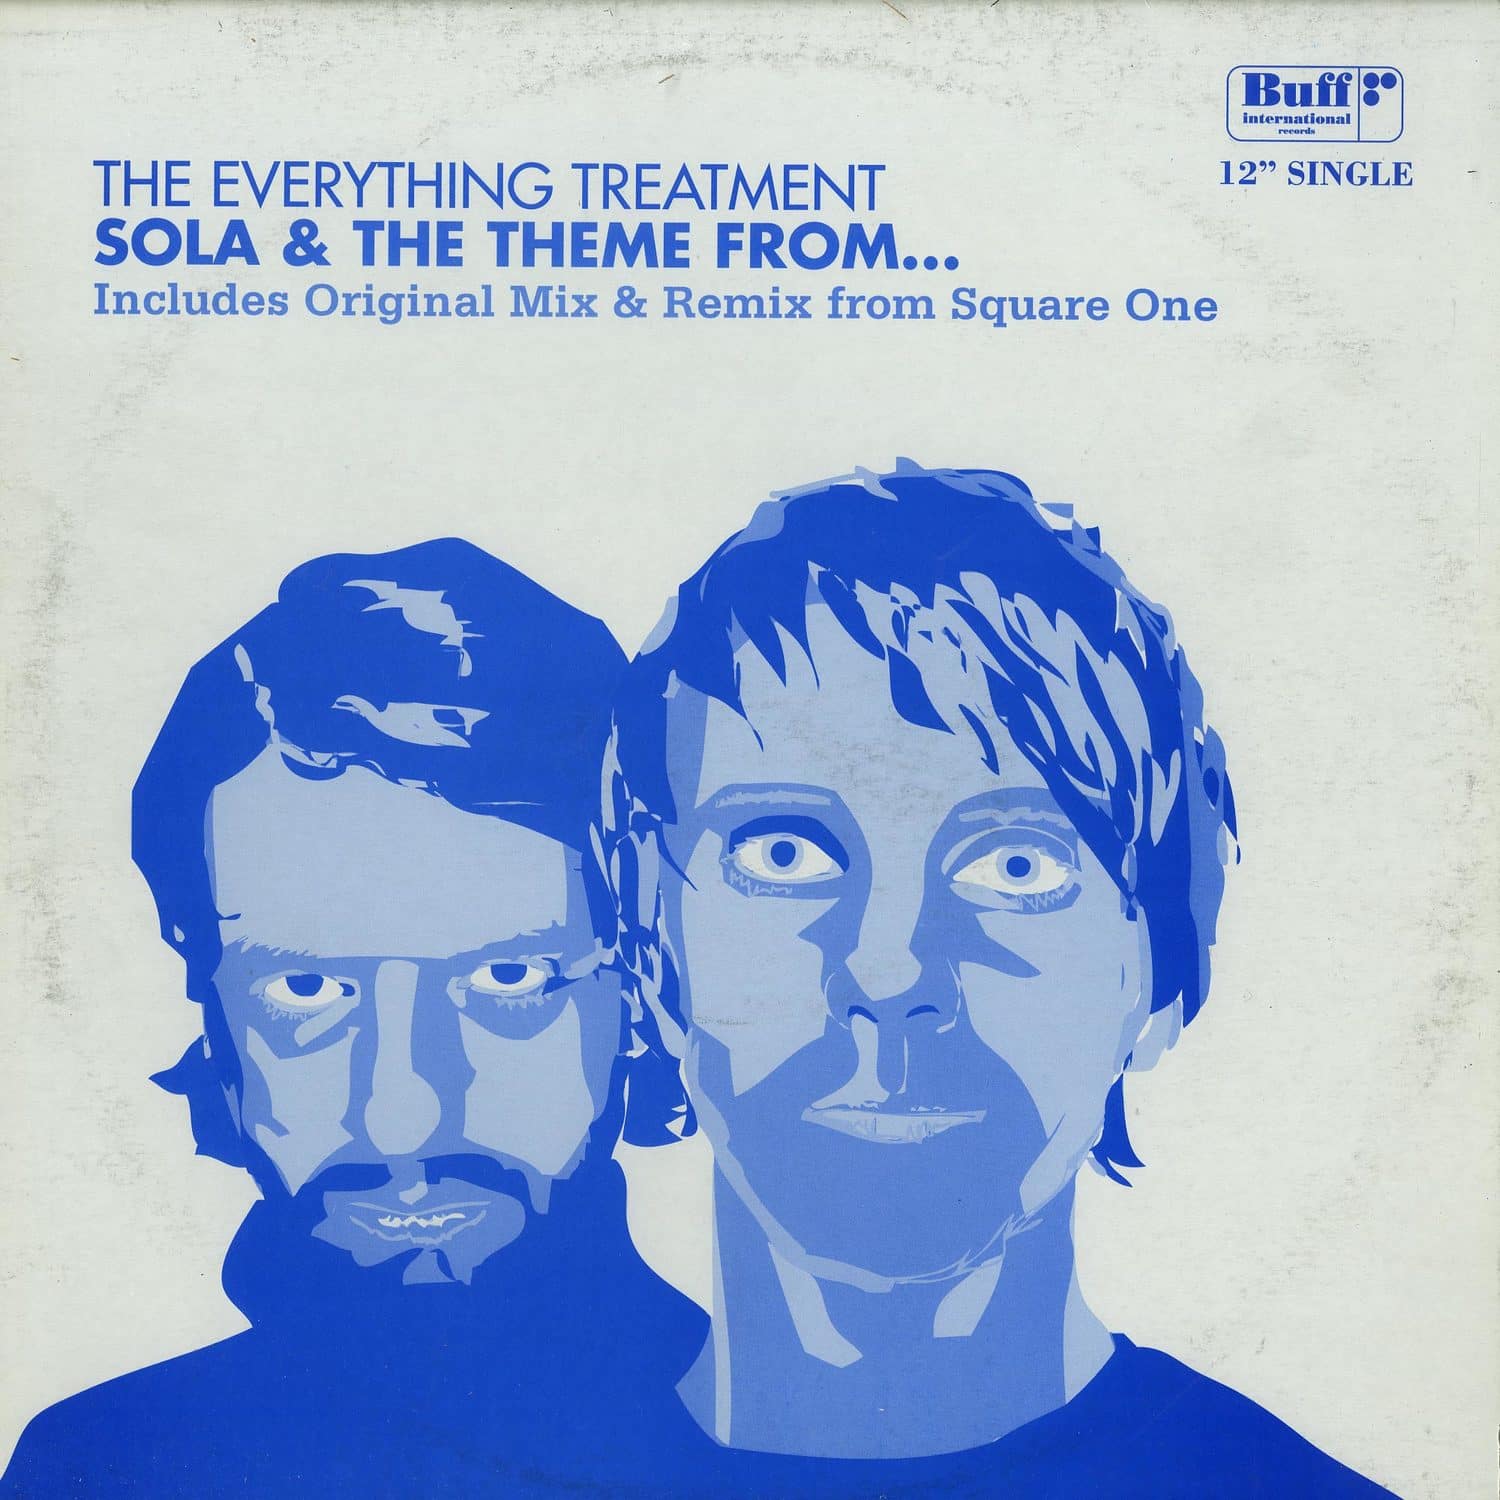 The Everything Treatment - THE THEME FROM...